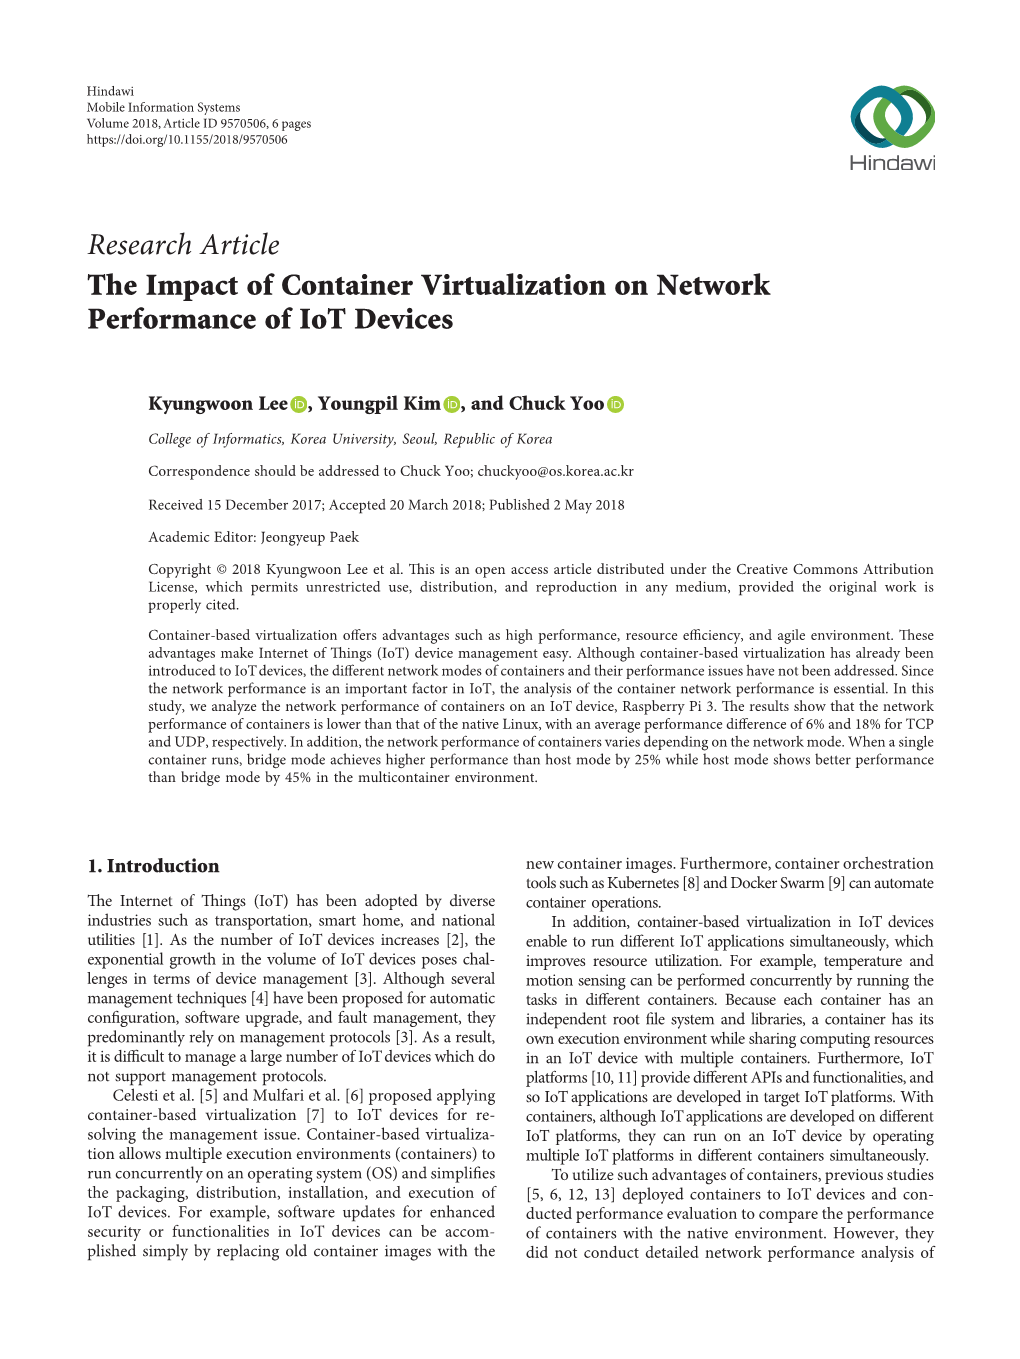 Research Article the Impact of Container Virtualization on Network Performance of Iot Devices